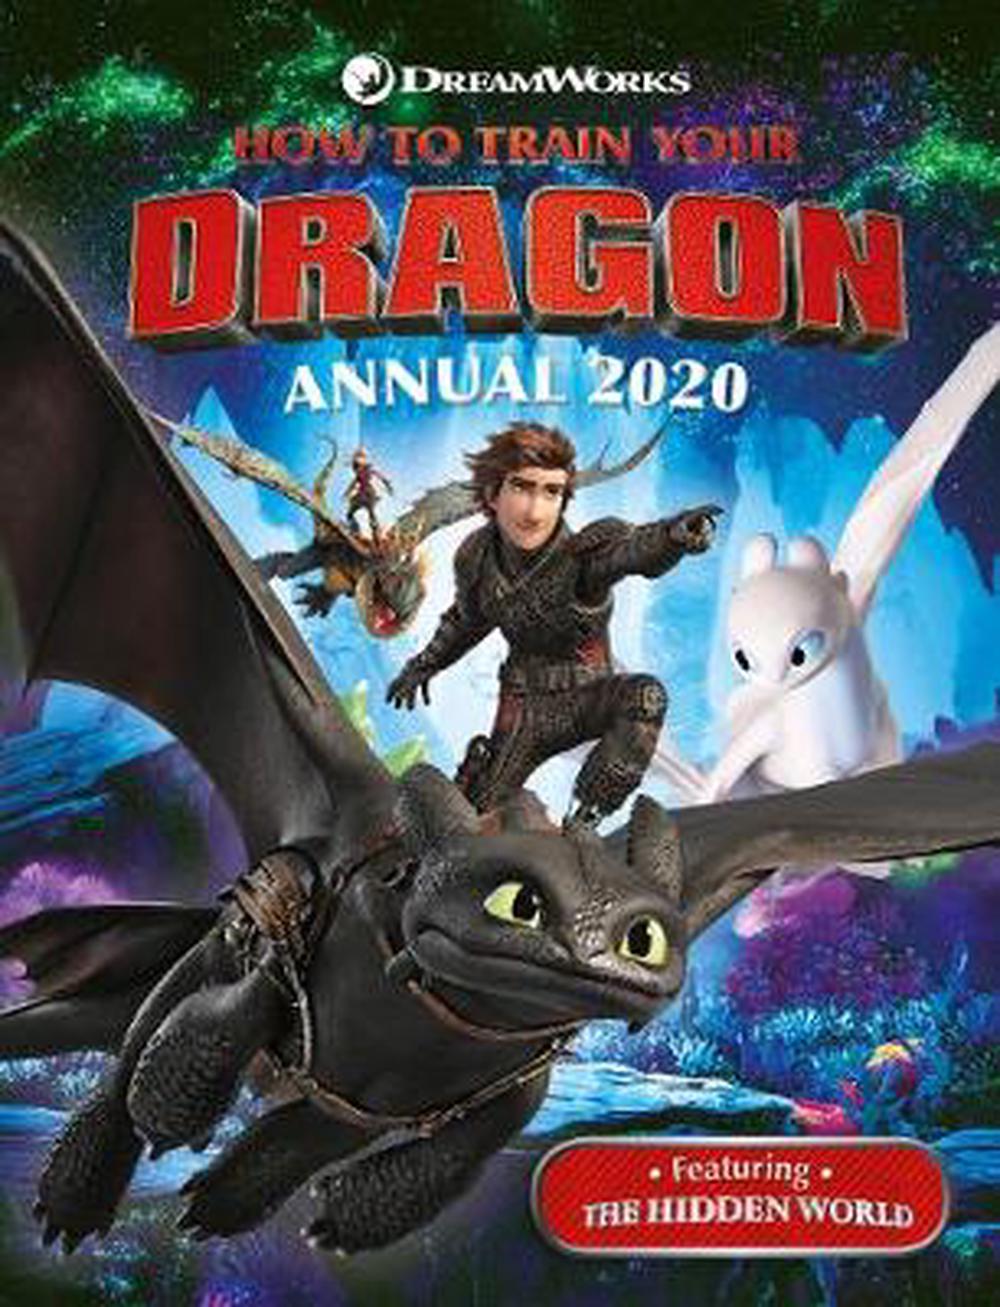 How To Train Your Dragon Annual 2020 By Egmont Publishing Uk Hardcover 9781405294270 Buy Online At The Nile - roblox character encyclopedia egmont publishing uk book